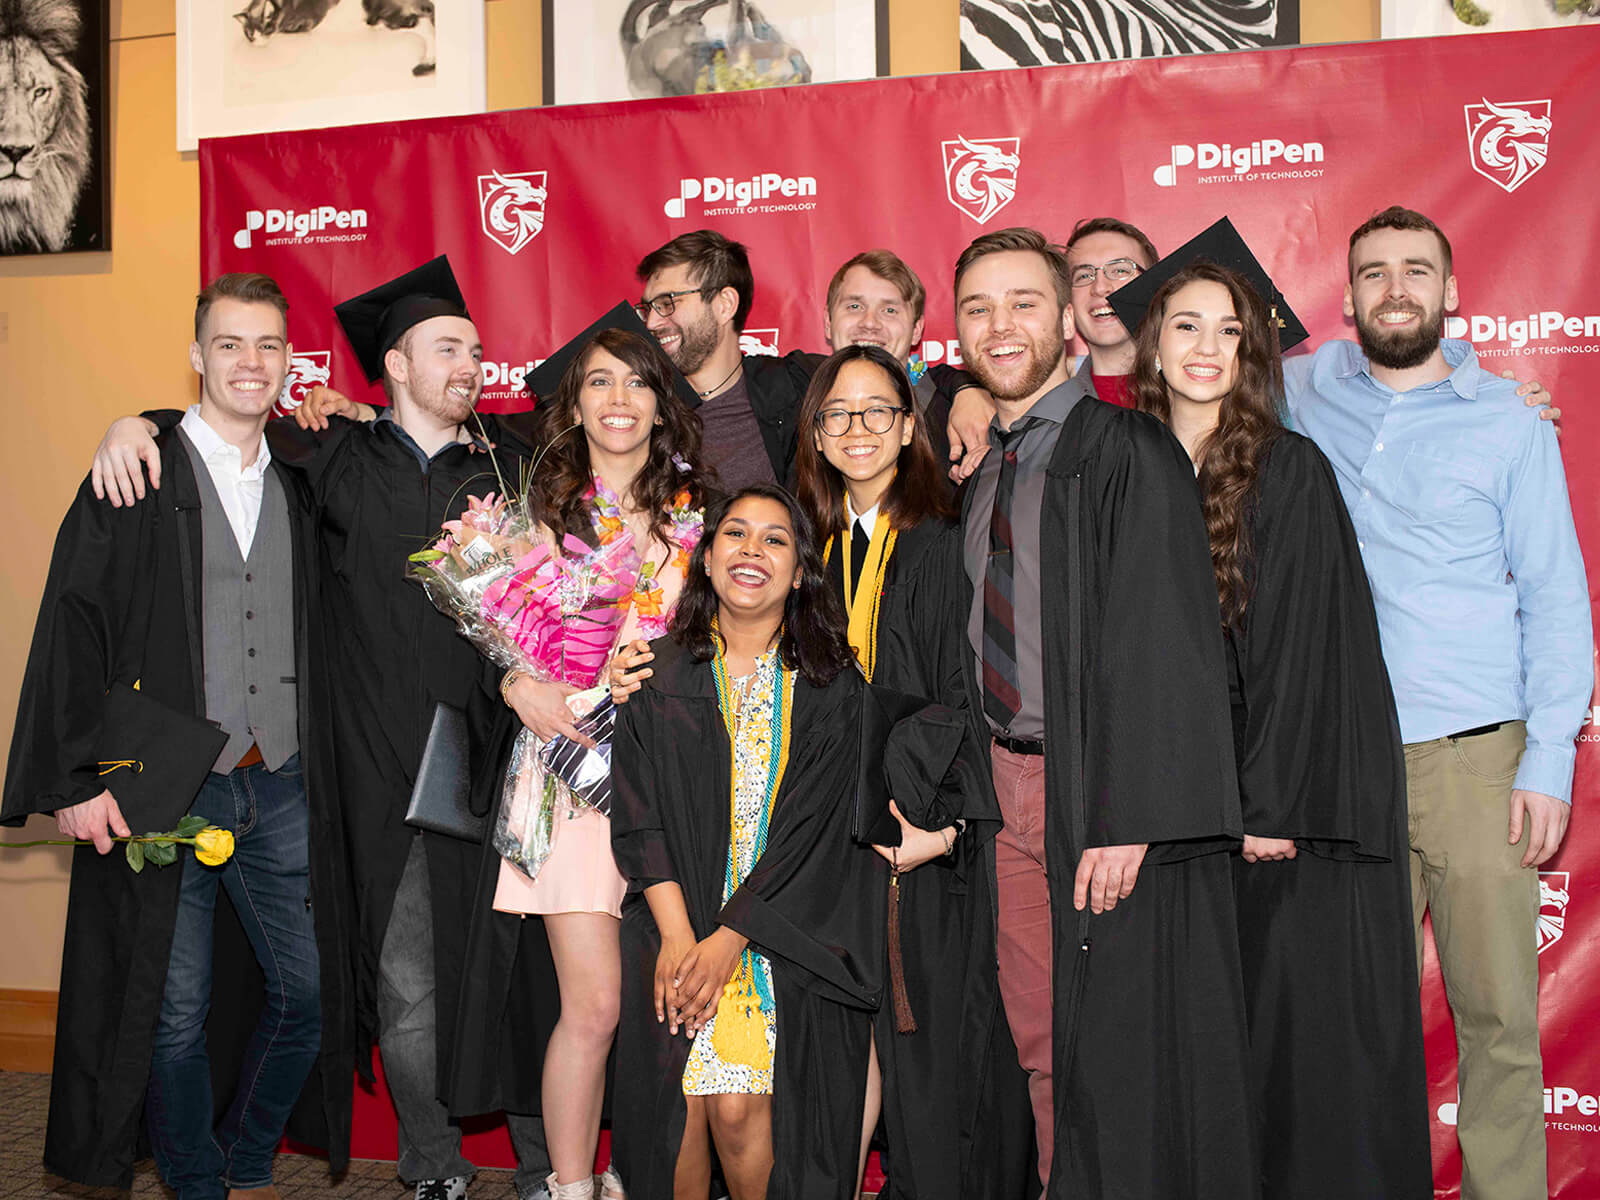 A group of DigiPen grads pose in front of a red backdrop